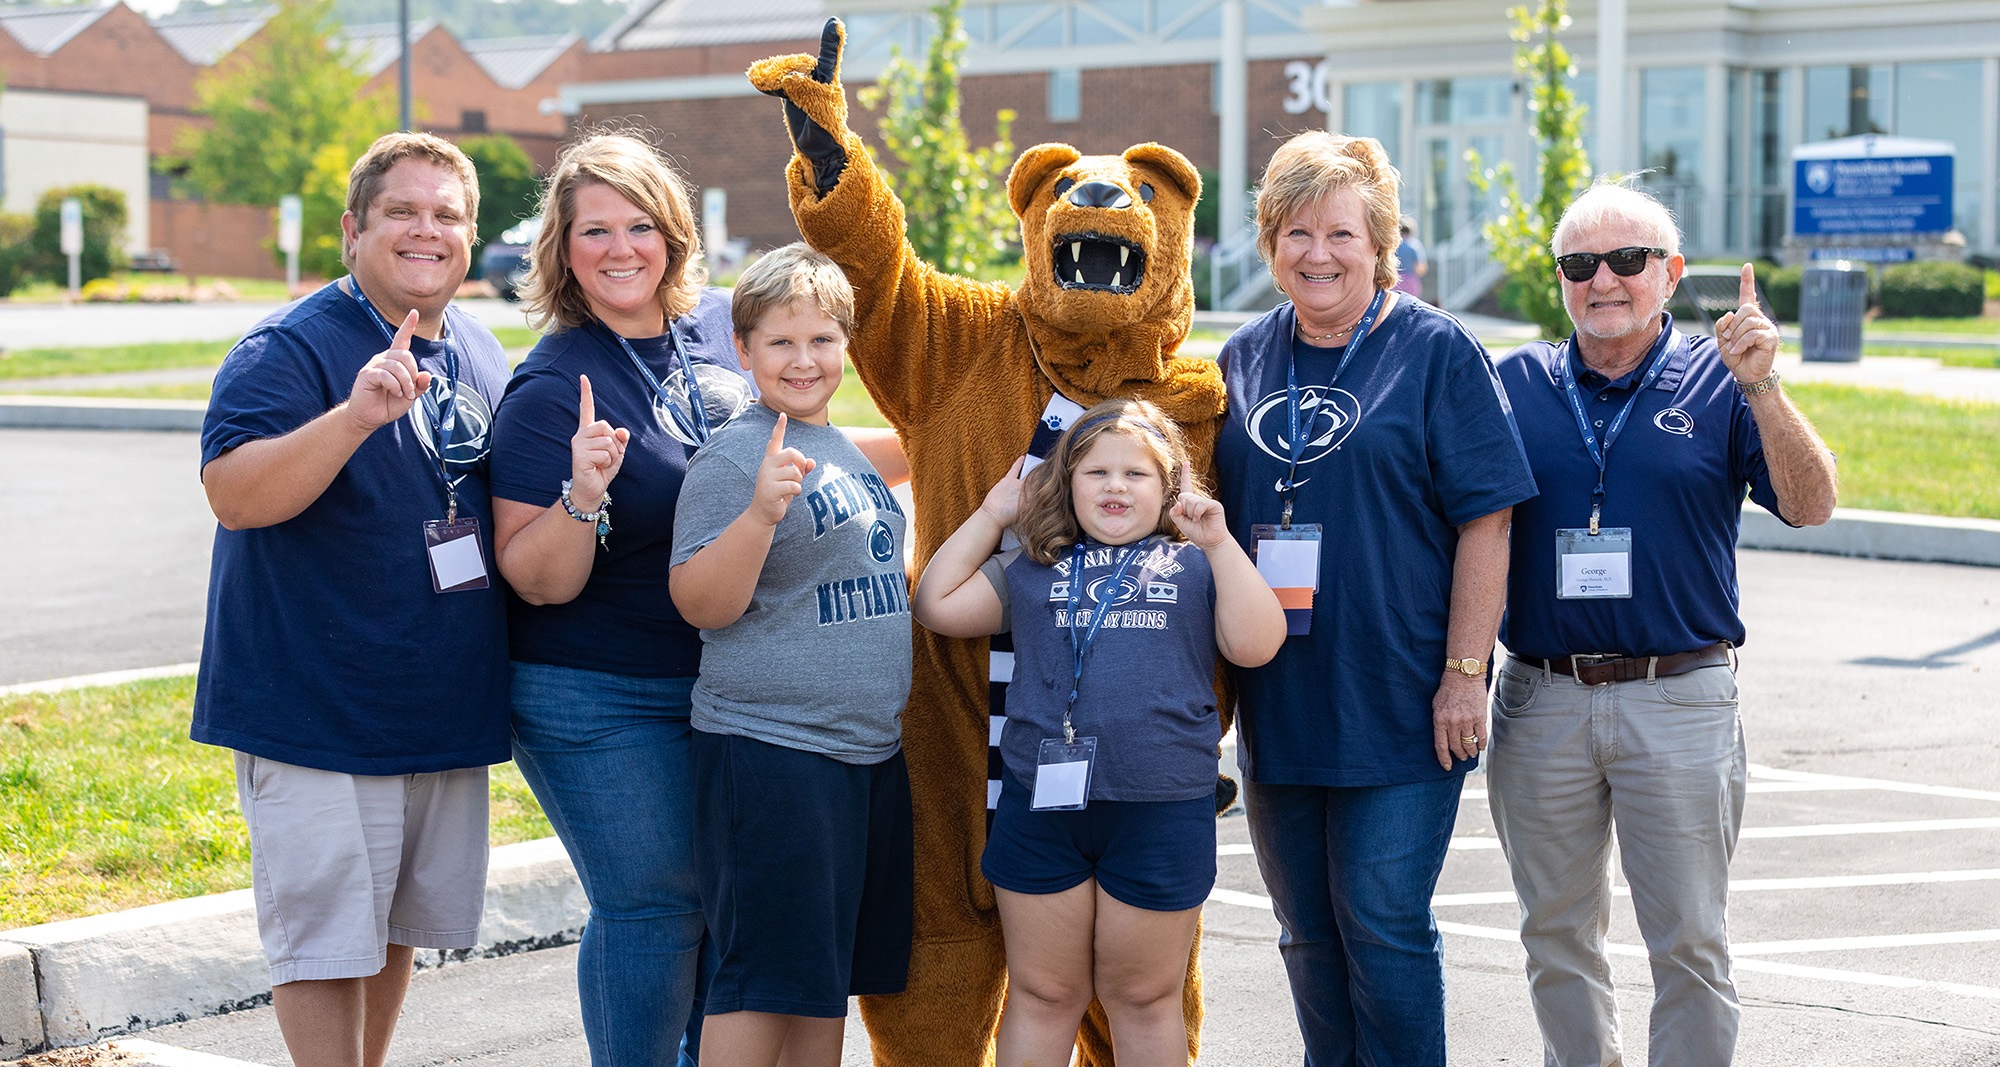 A group of people wearing Penn State clothing pose and give the No. 1 hand sign with the Nittany Lion mascot.